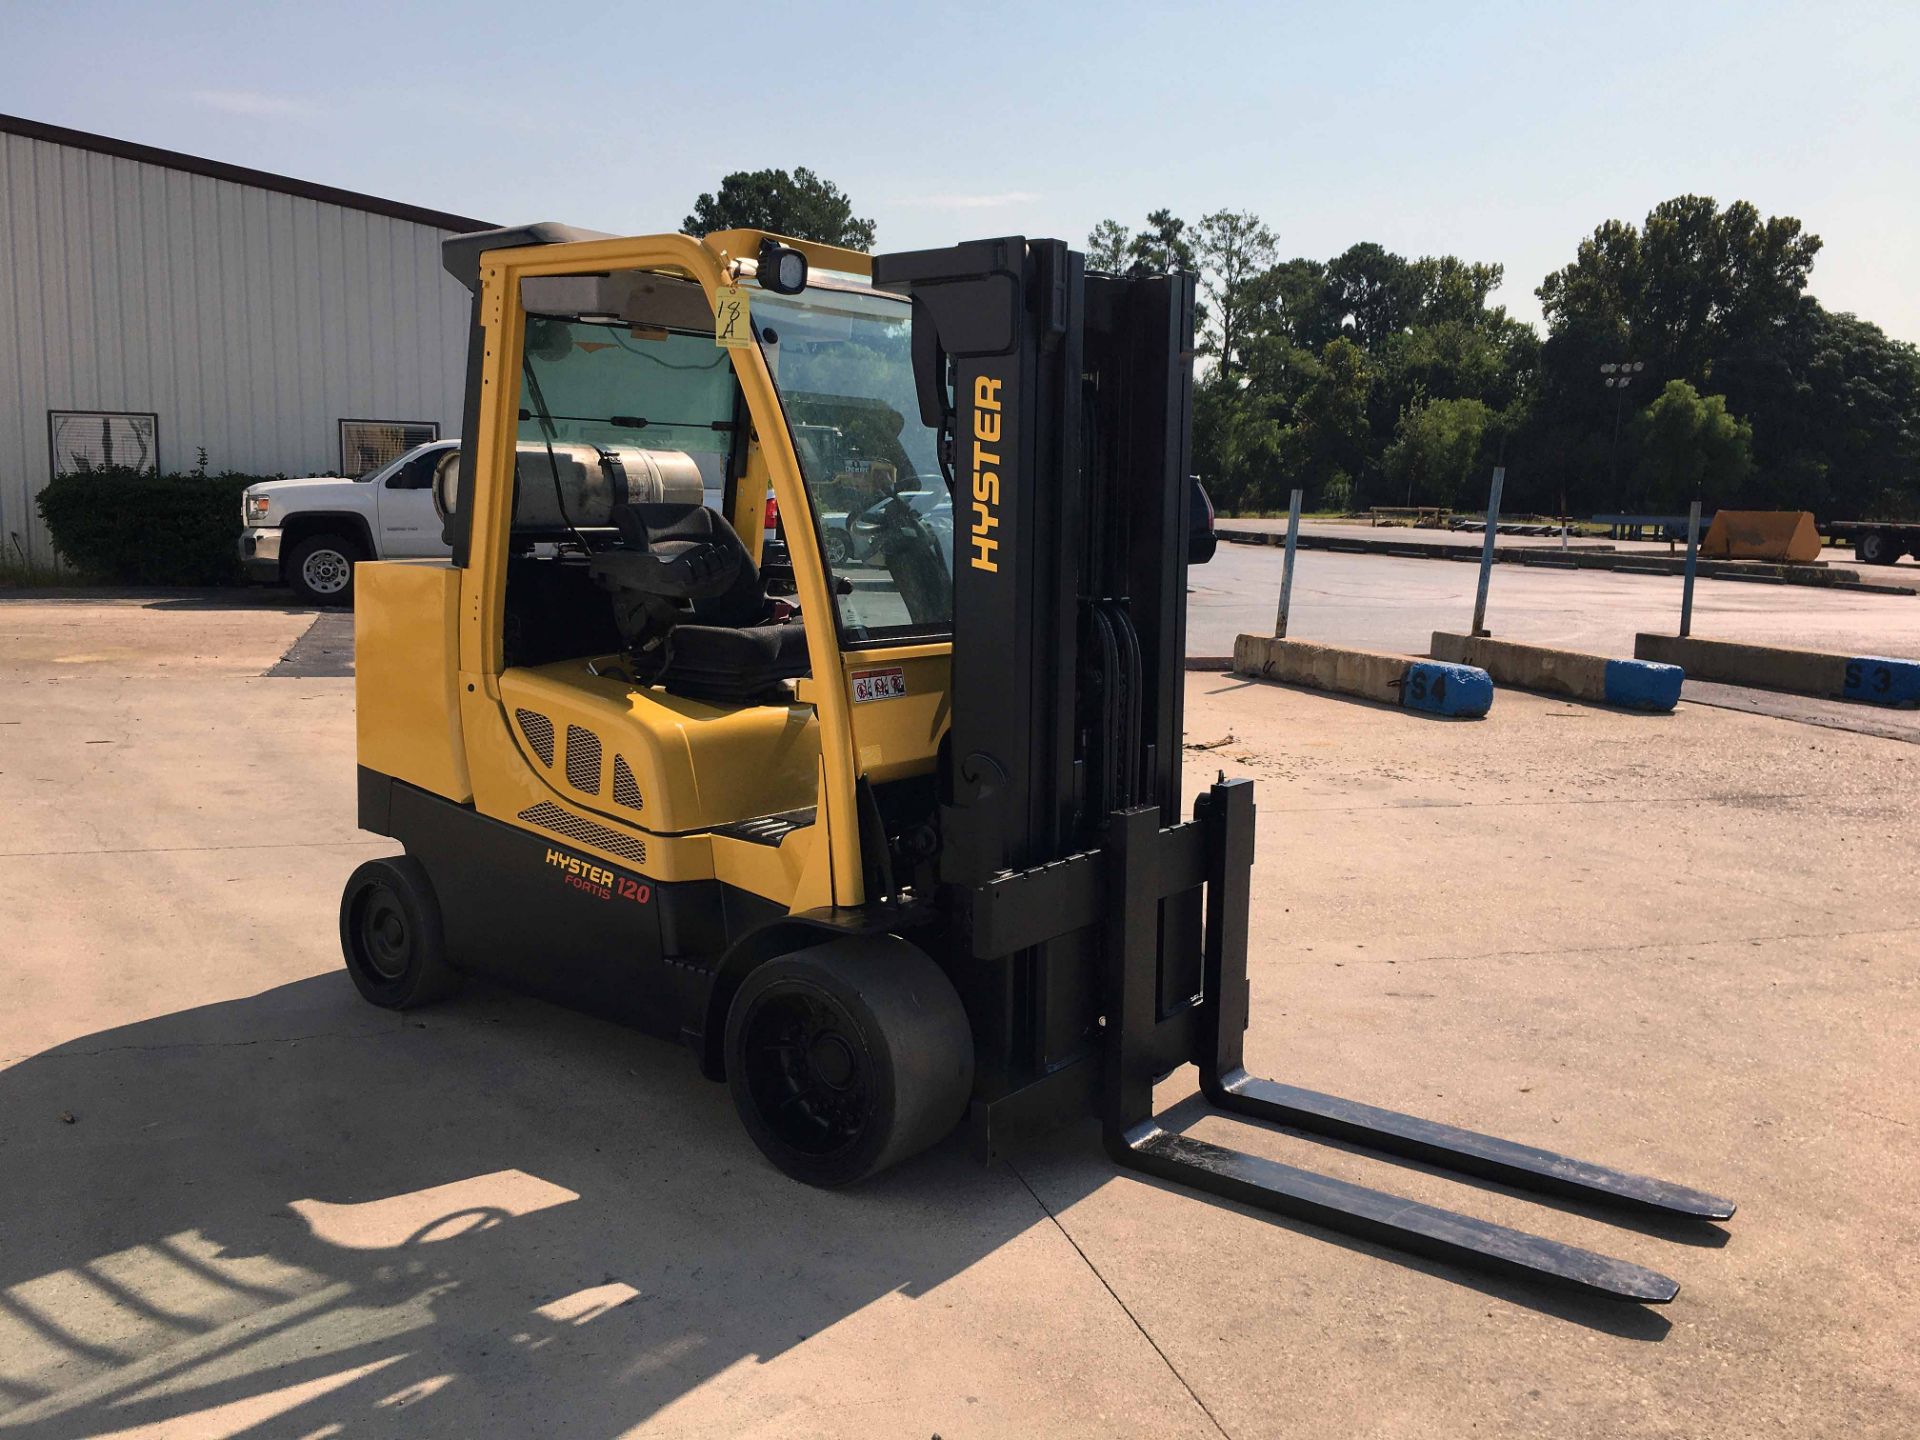 FORKLIFT, HYSTER 12,000 LB BASE CAP. MDL. S120FT, new 2015, LPG, 171” max. lift ht., 83” 3-stage